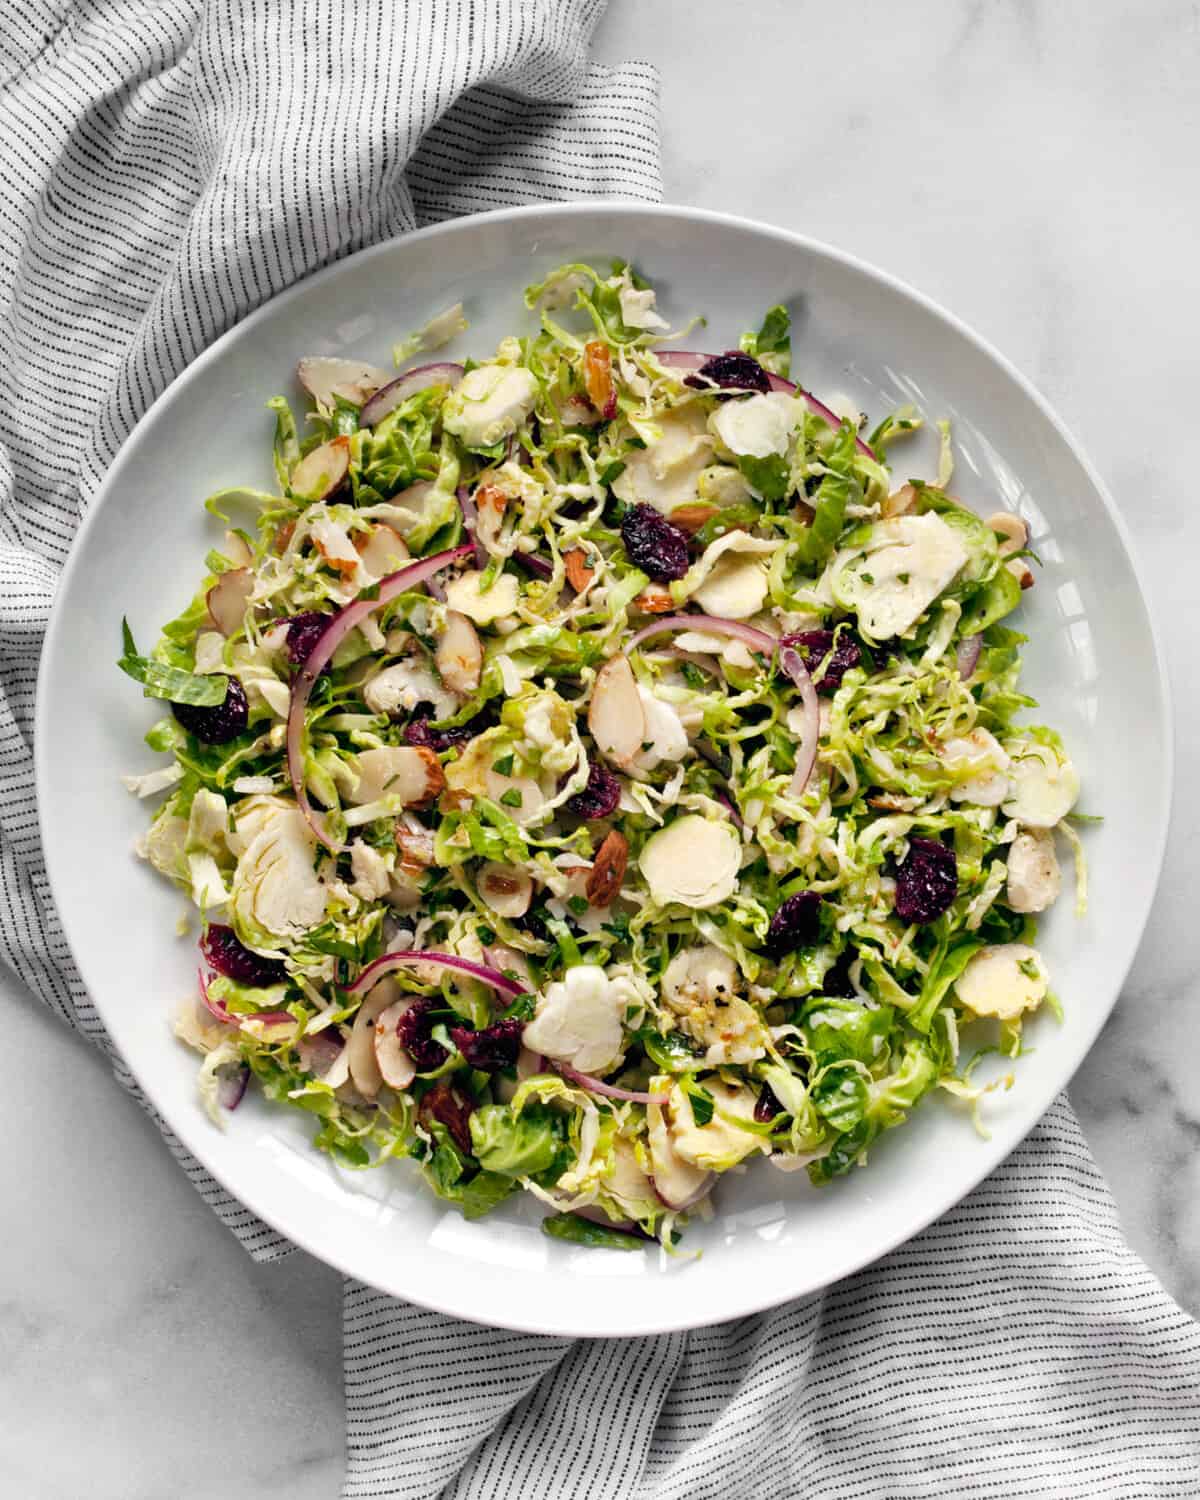 Salad with brussels sprouts, cranberries, parmesan, almonds and red onions on a plate.